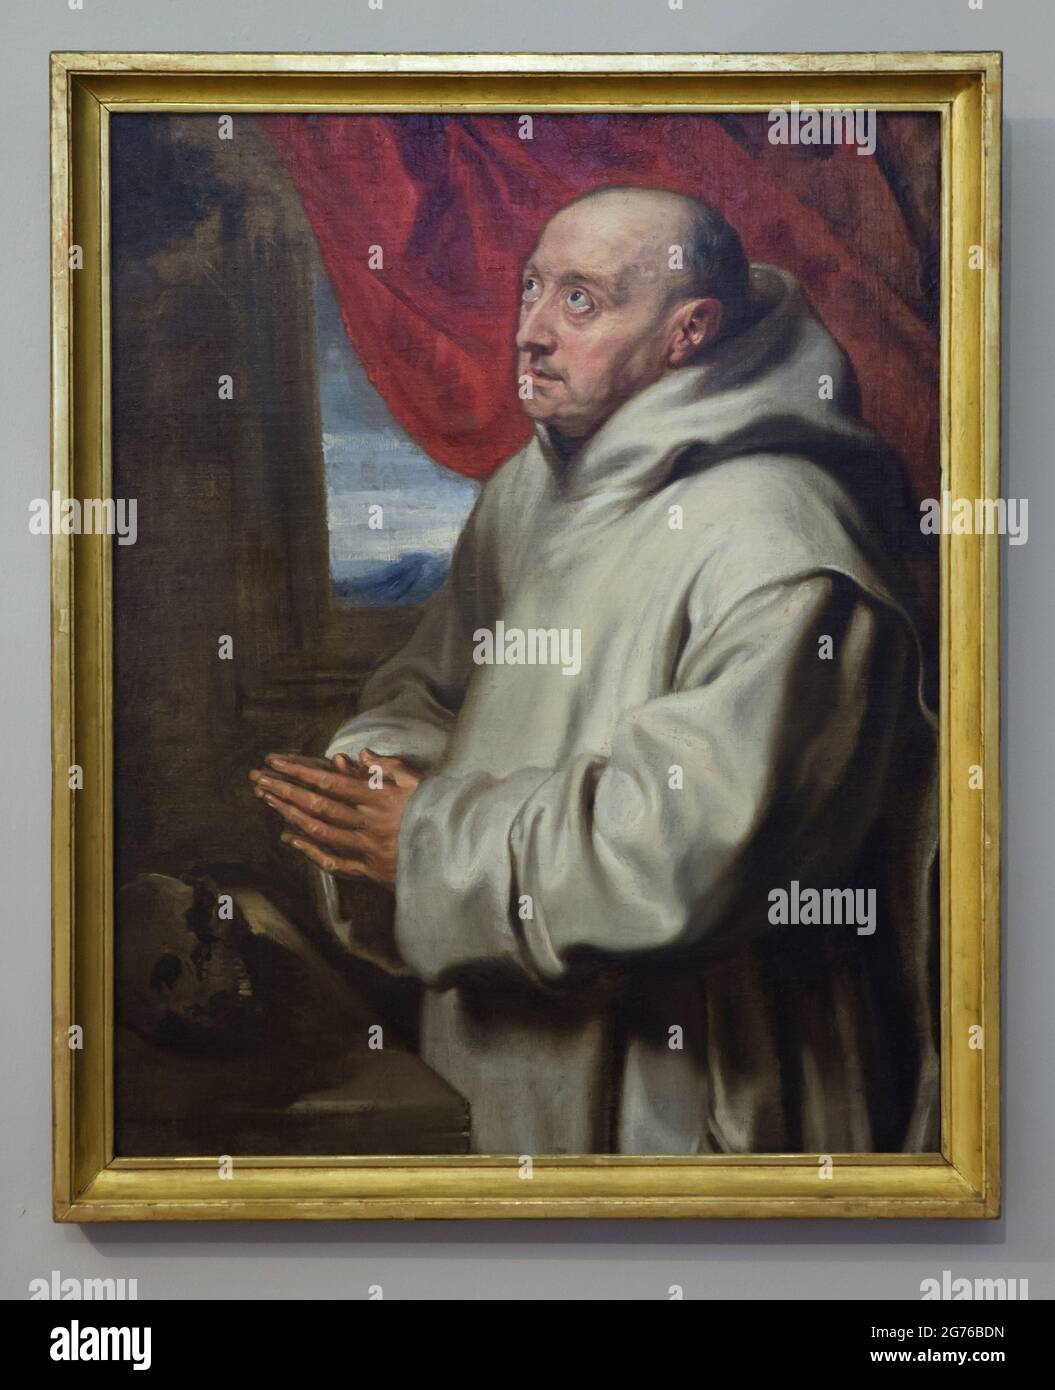 Painting 'Saint Bruno' by Flemish Baroque painter Anthony van Dyck (1620) on display at the permanent exhibition of old masters of the National Gallery (Národní galerie) in Sternberg Palace (Šternberský palác) in Prague, Czech Republic. Stock Photo